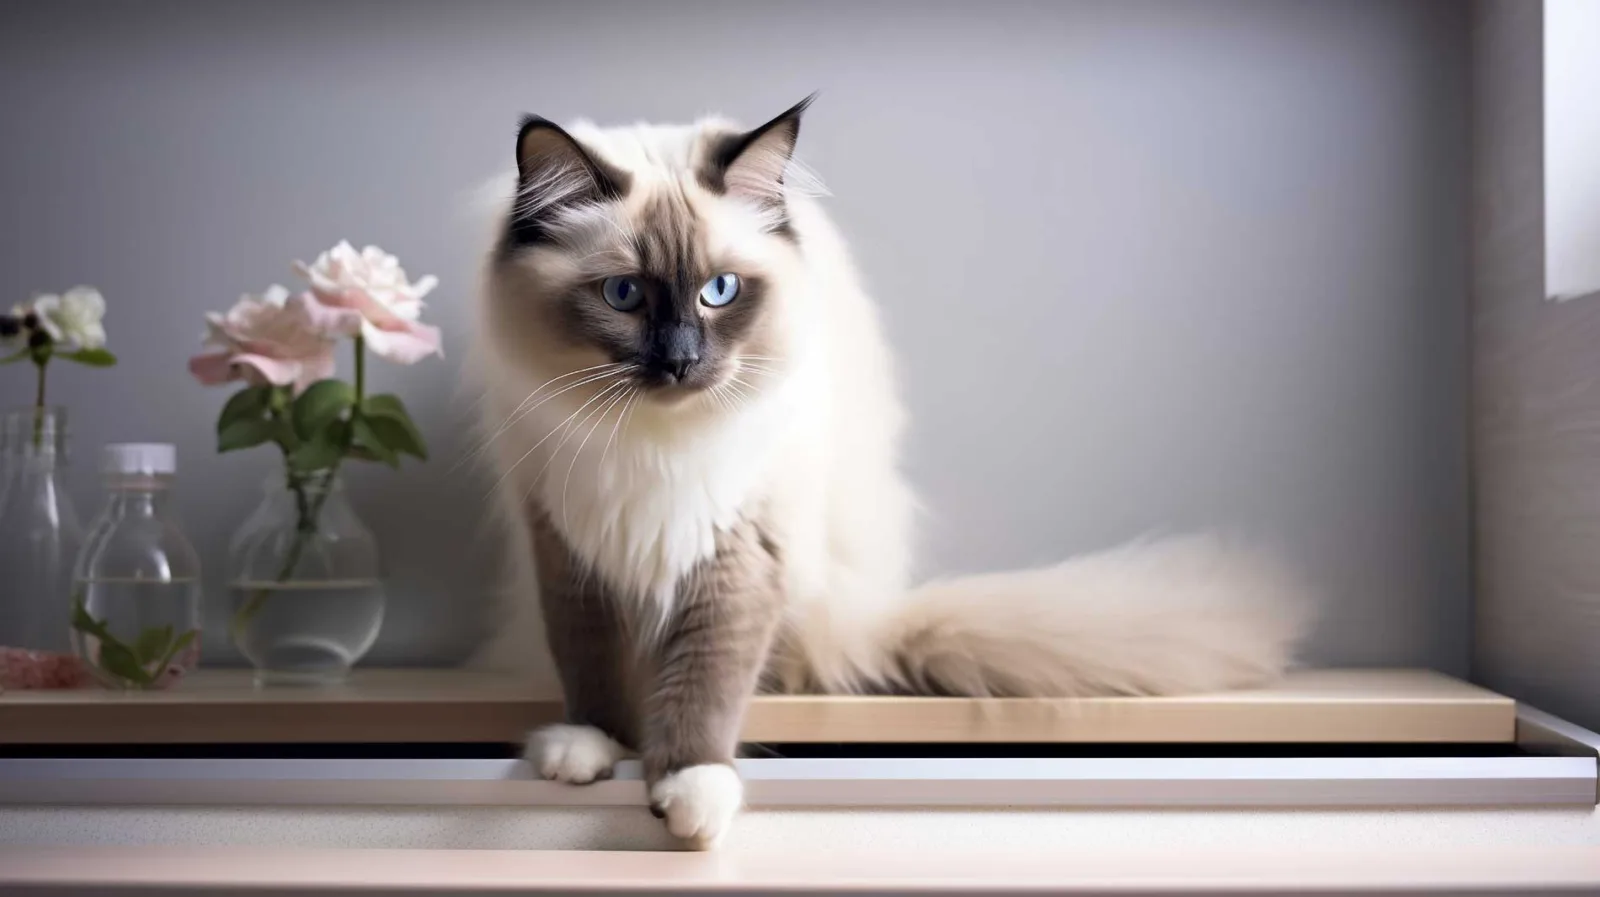 Birman cat with a curious expression about to jump down from an elevated place